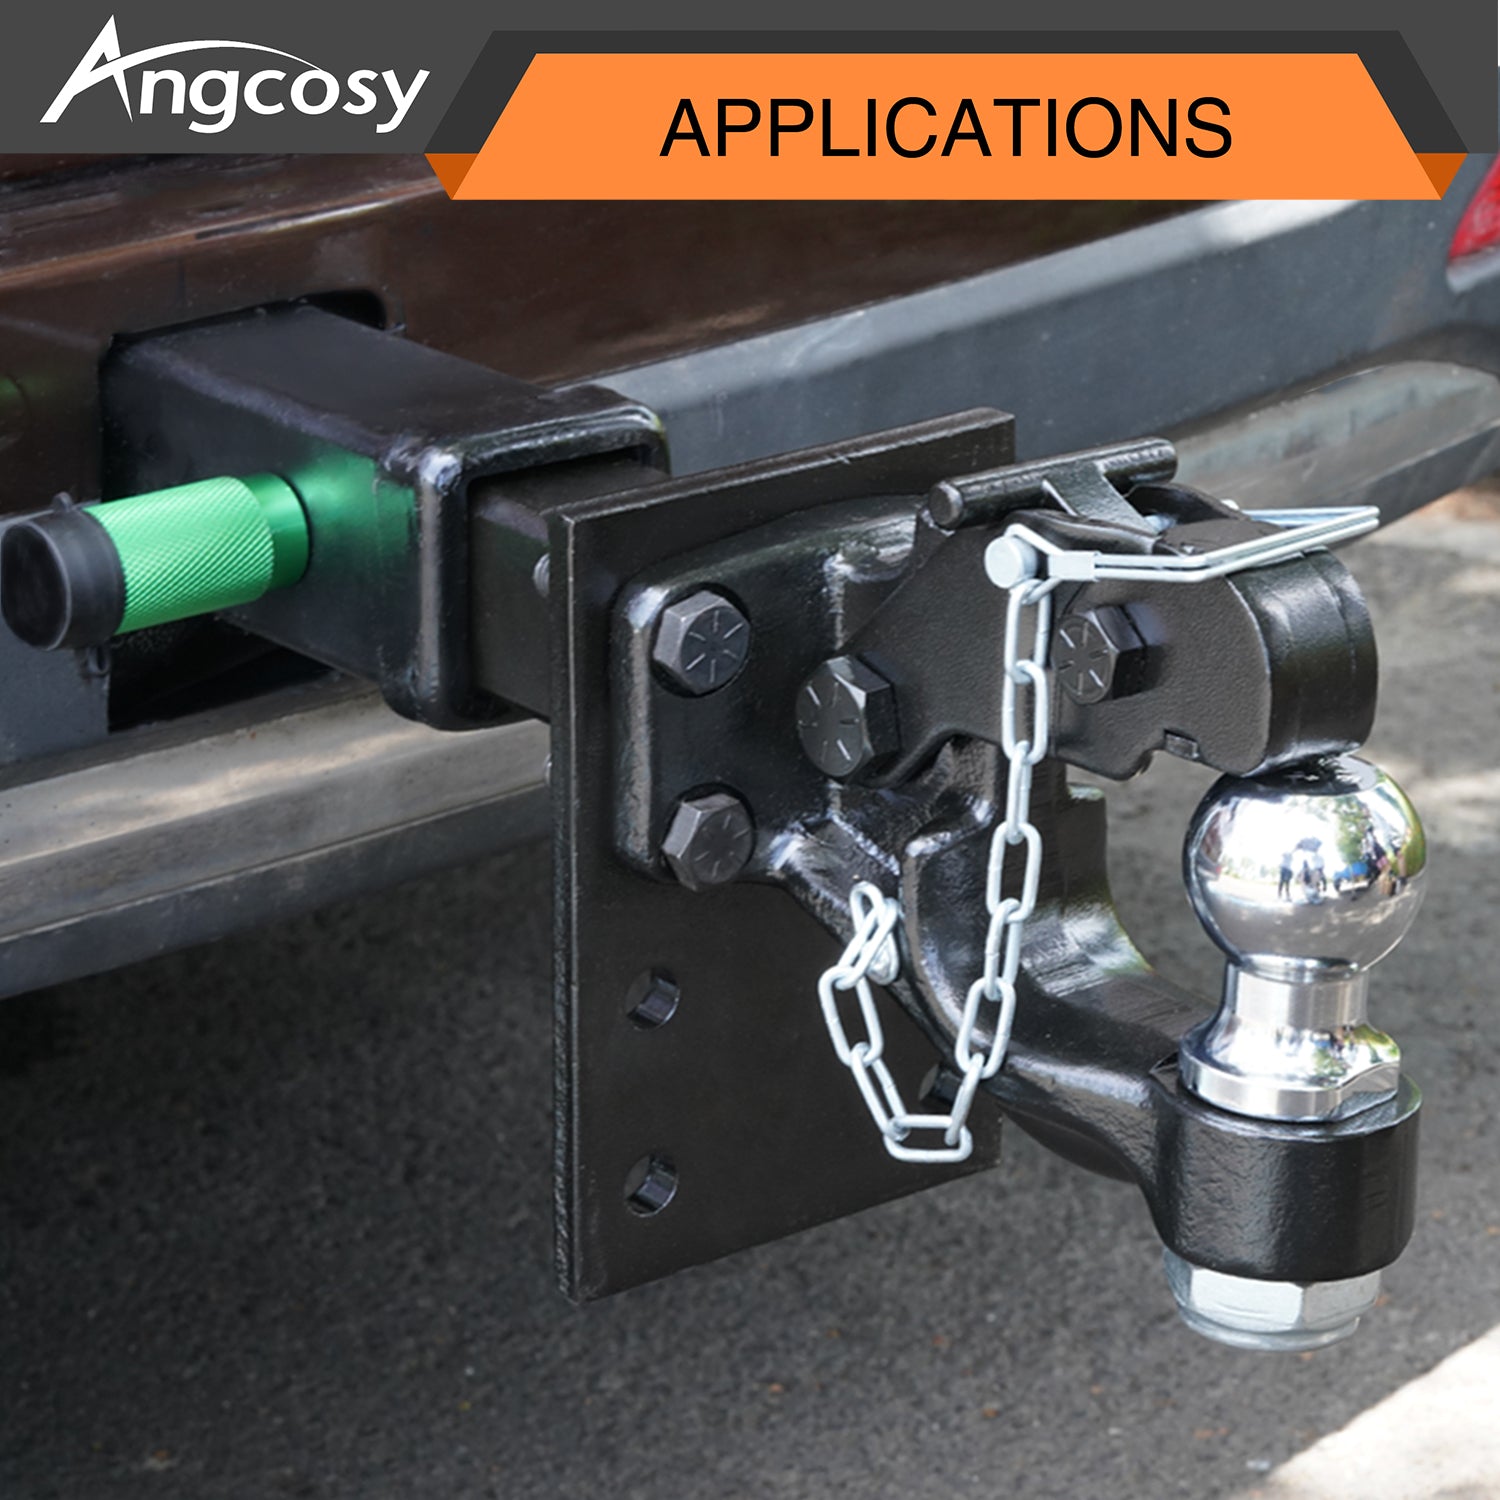 ANGCOSY Pintle Hook Mount for 2 Hitch Receiver ｜ 9-Inch Length